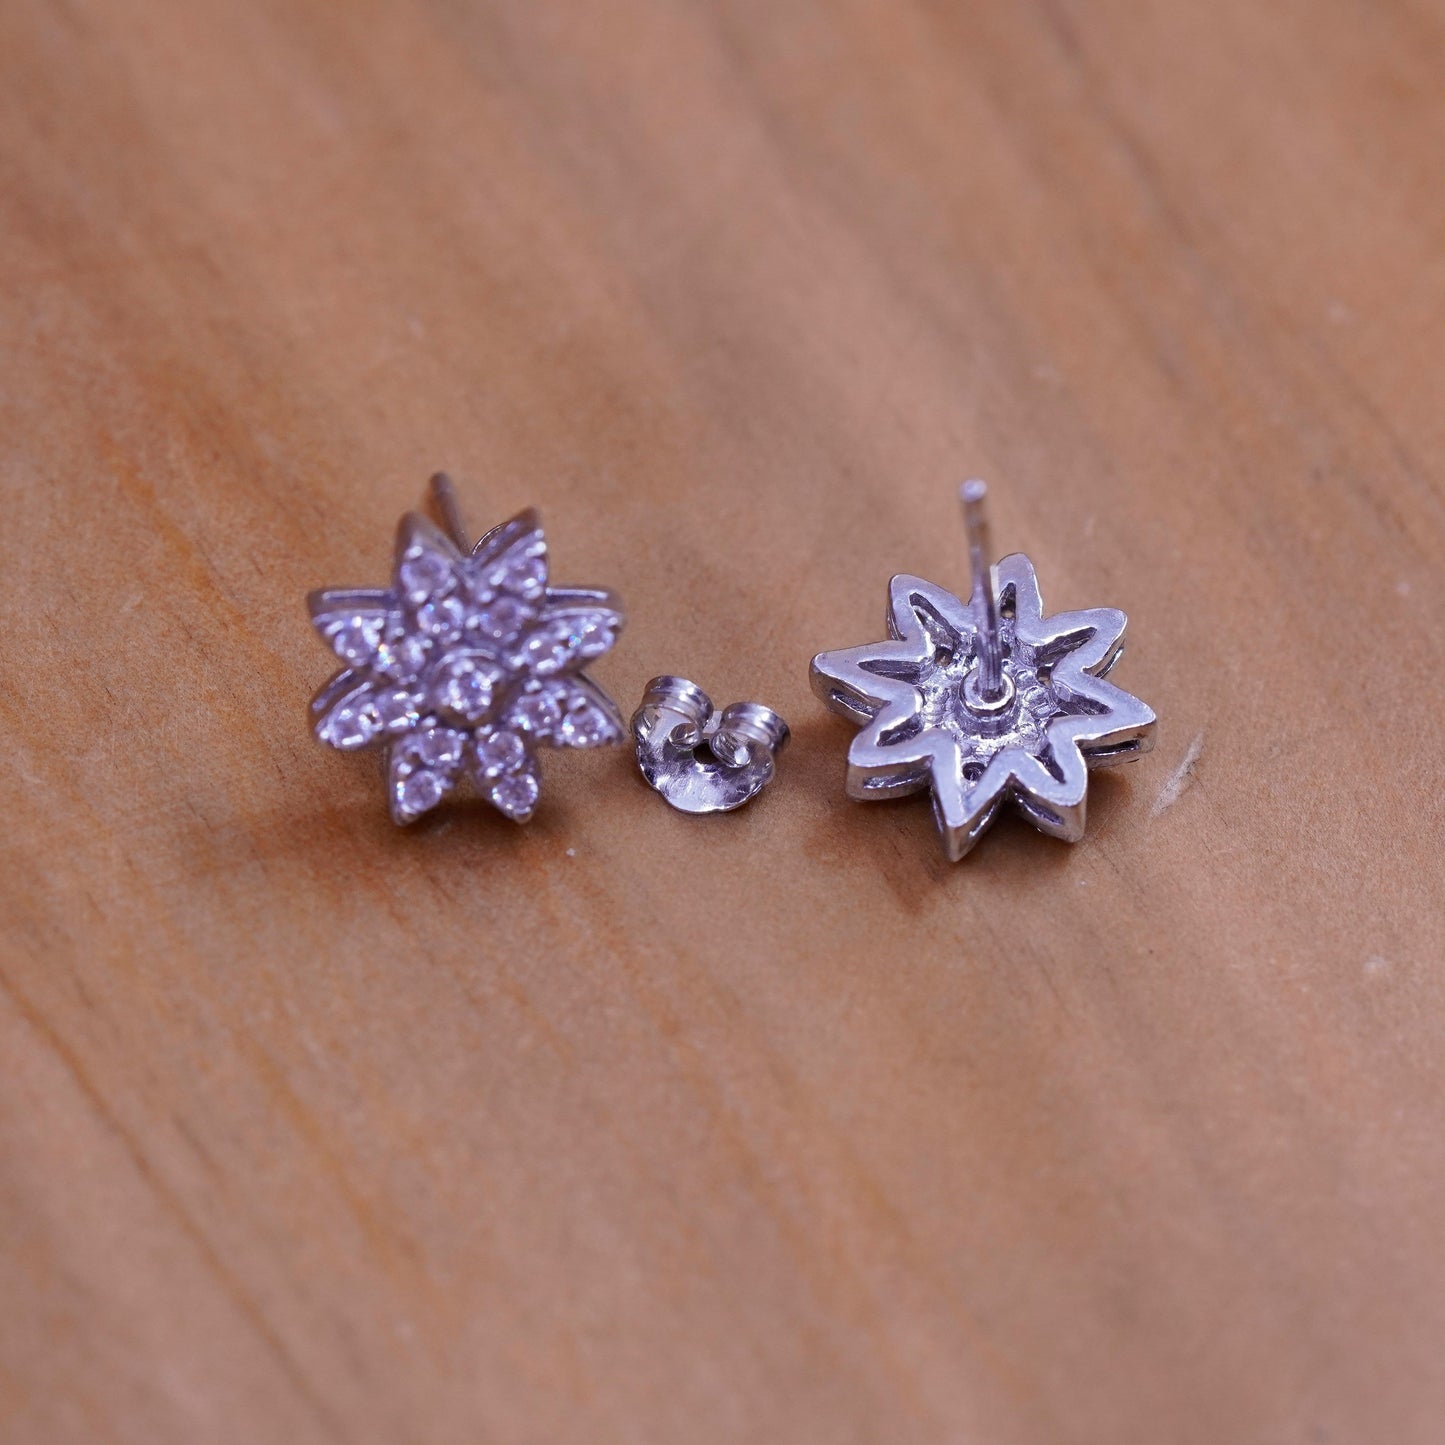 10mm, vintage Sterling silver clear round crystal flower studs, cz earrings